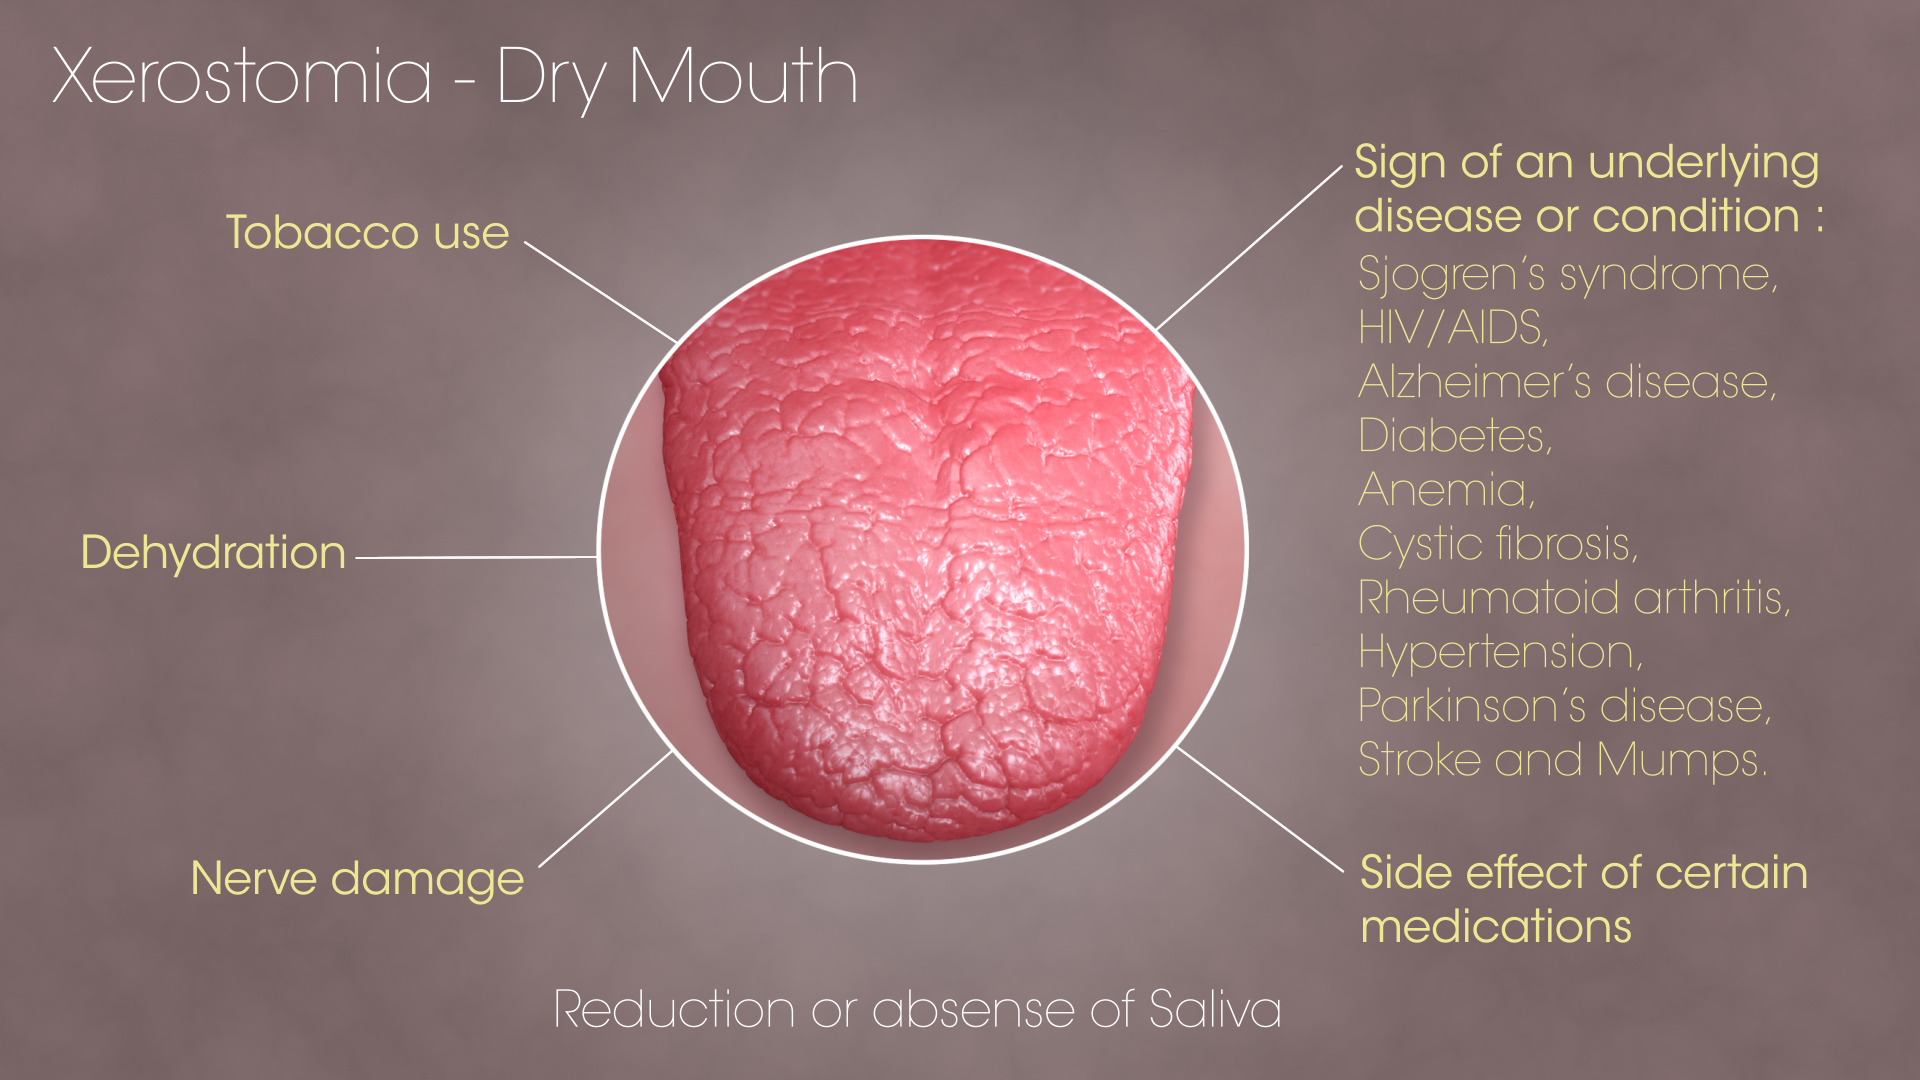 Dry mouth